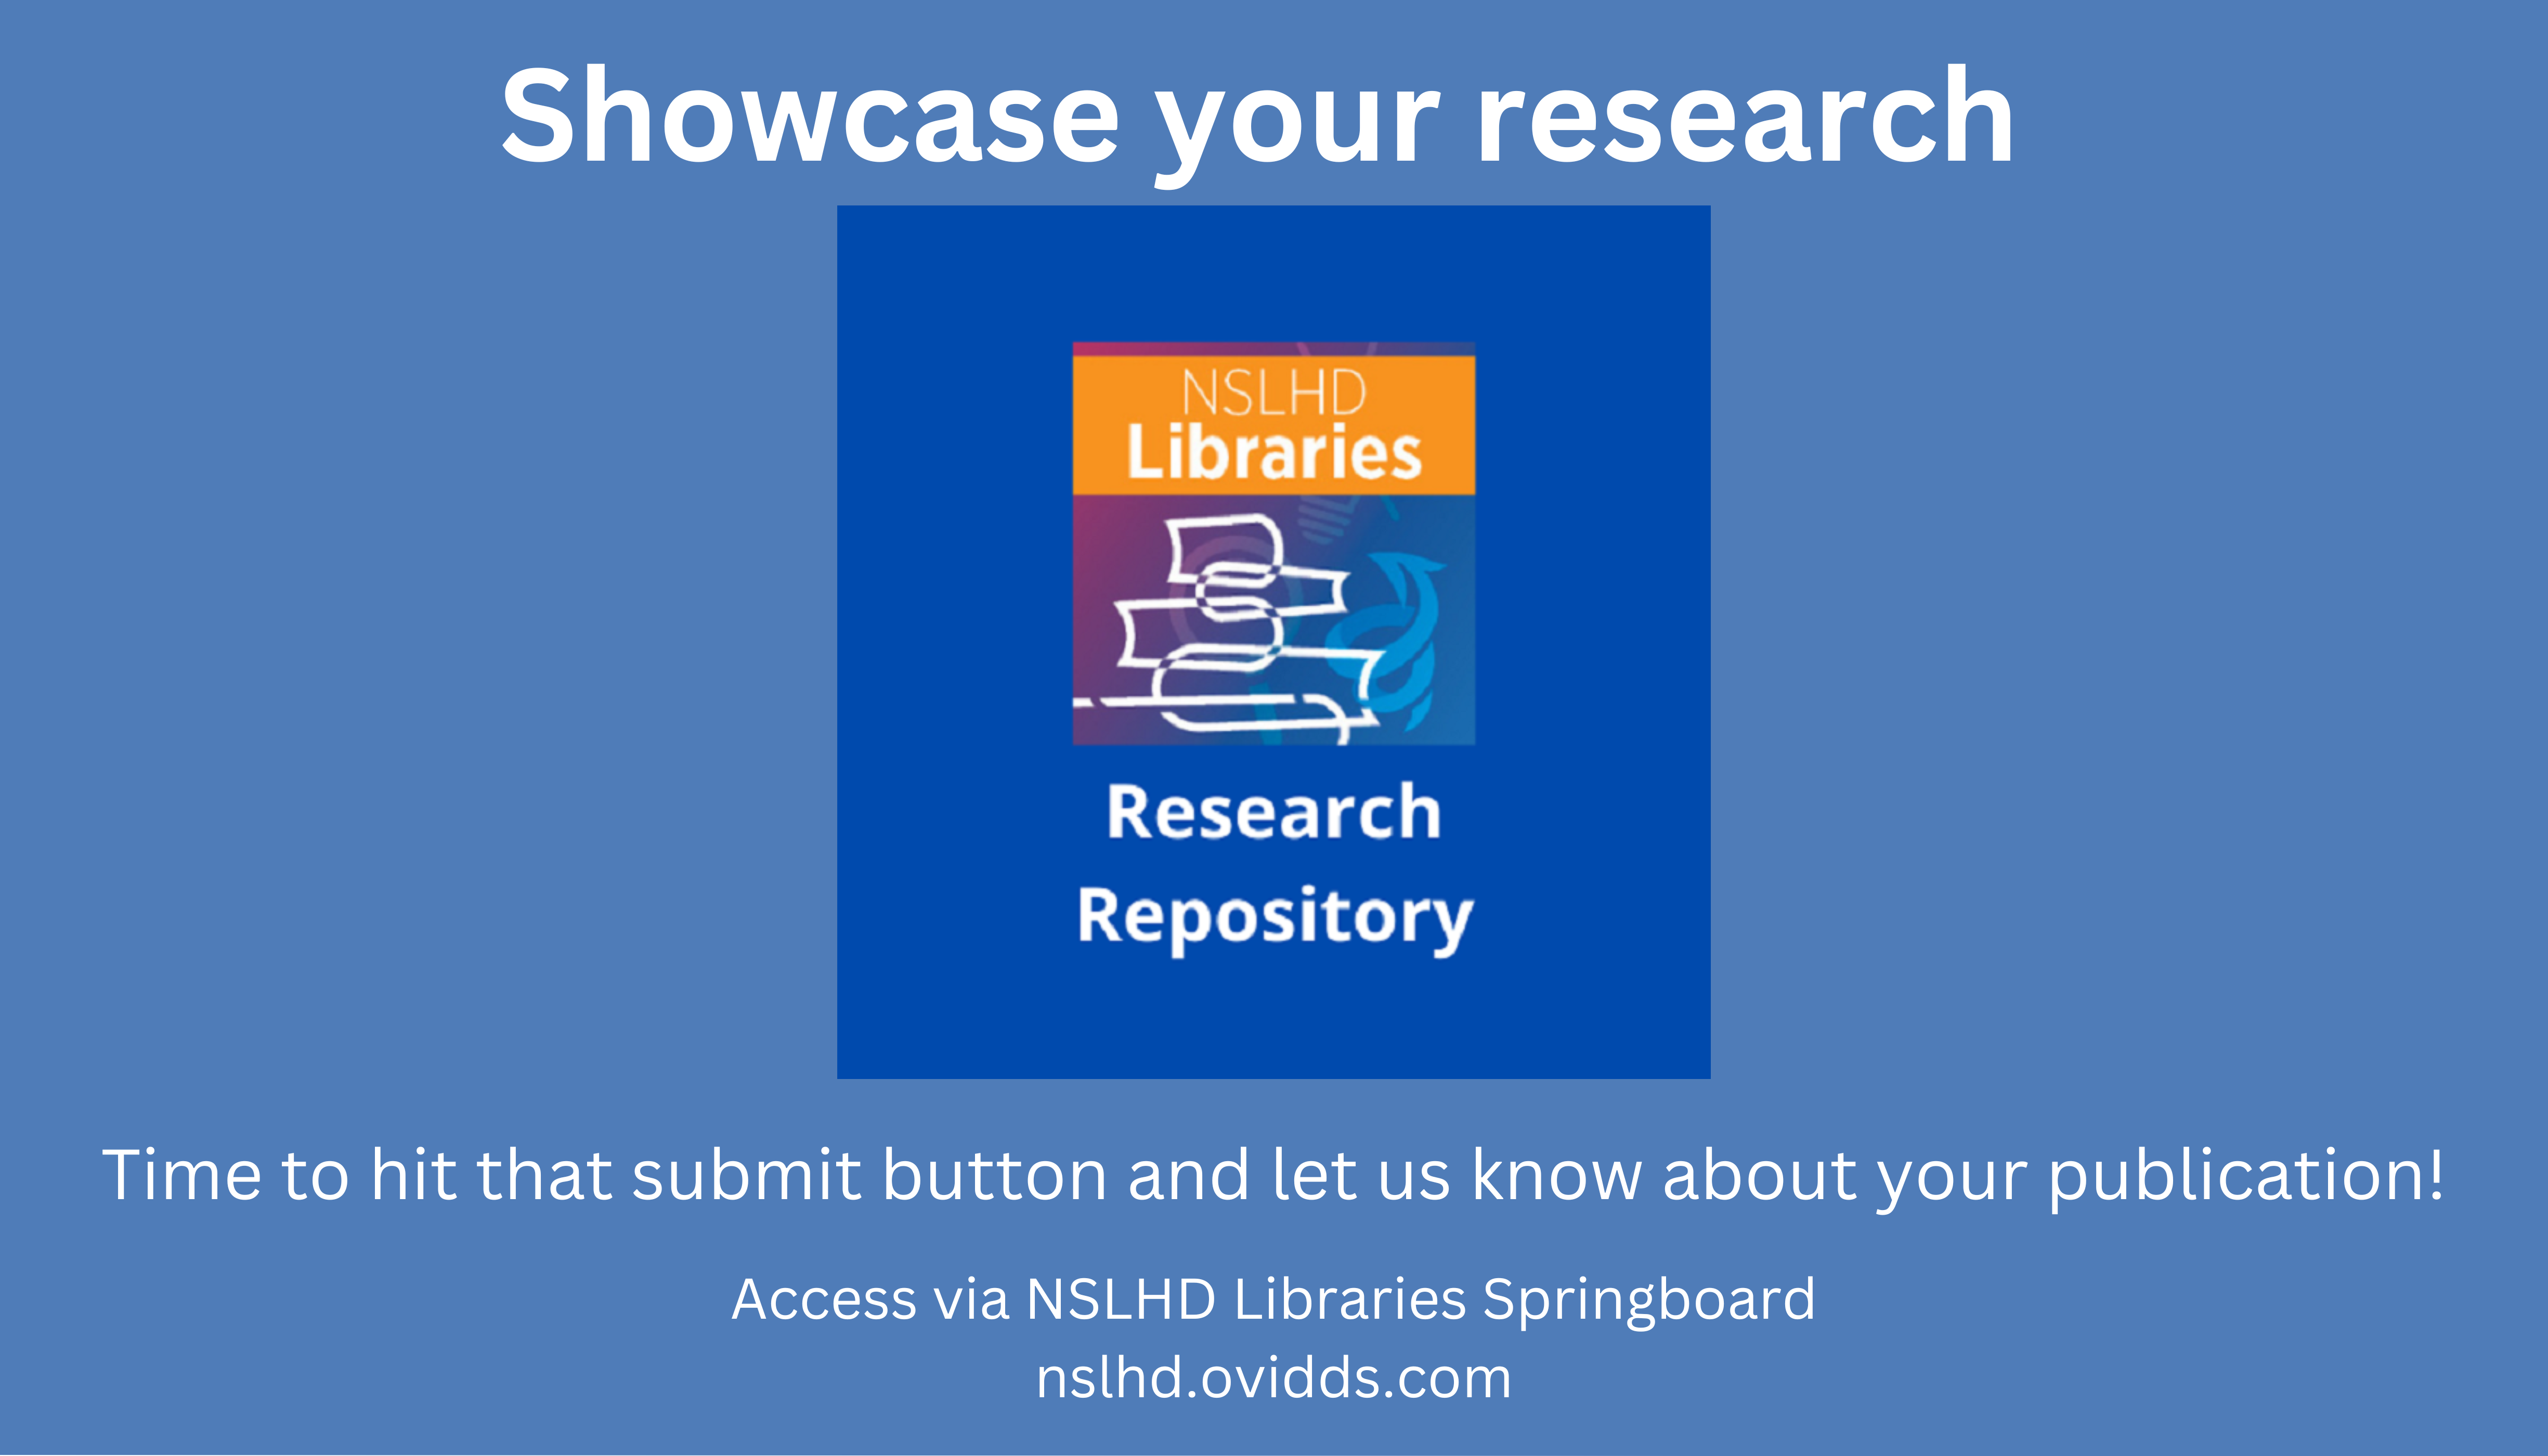 NSLHD Libraries Research Repository - Showcase your research